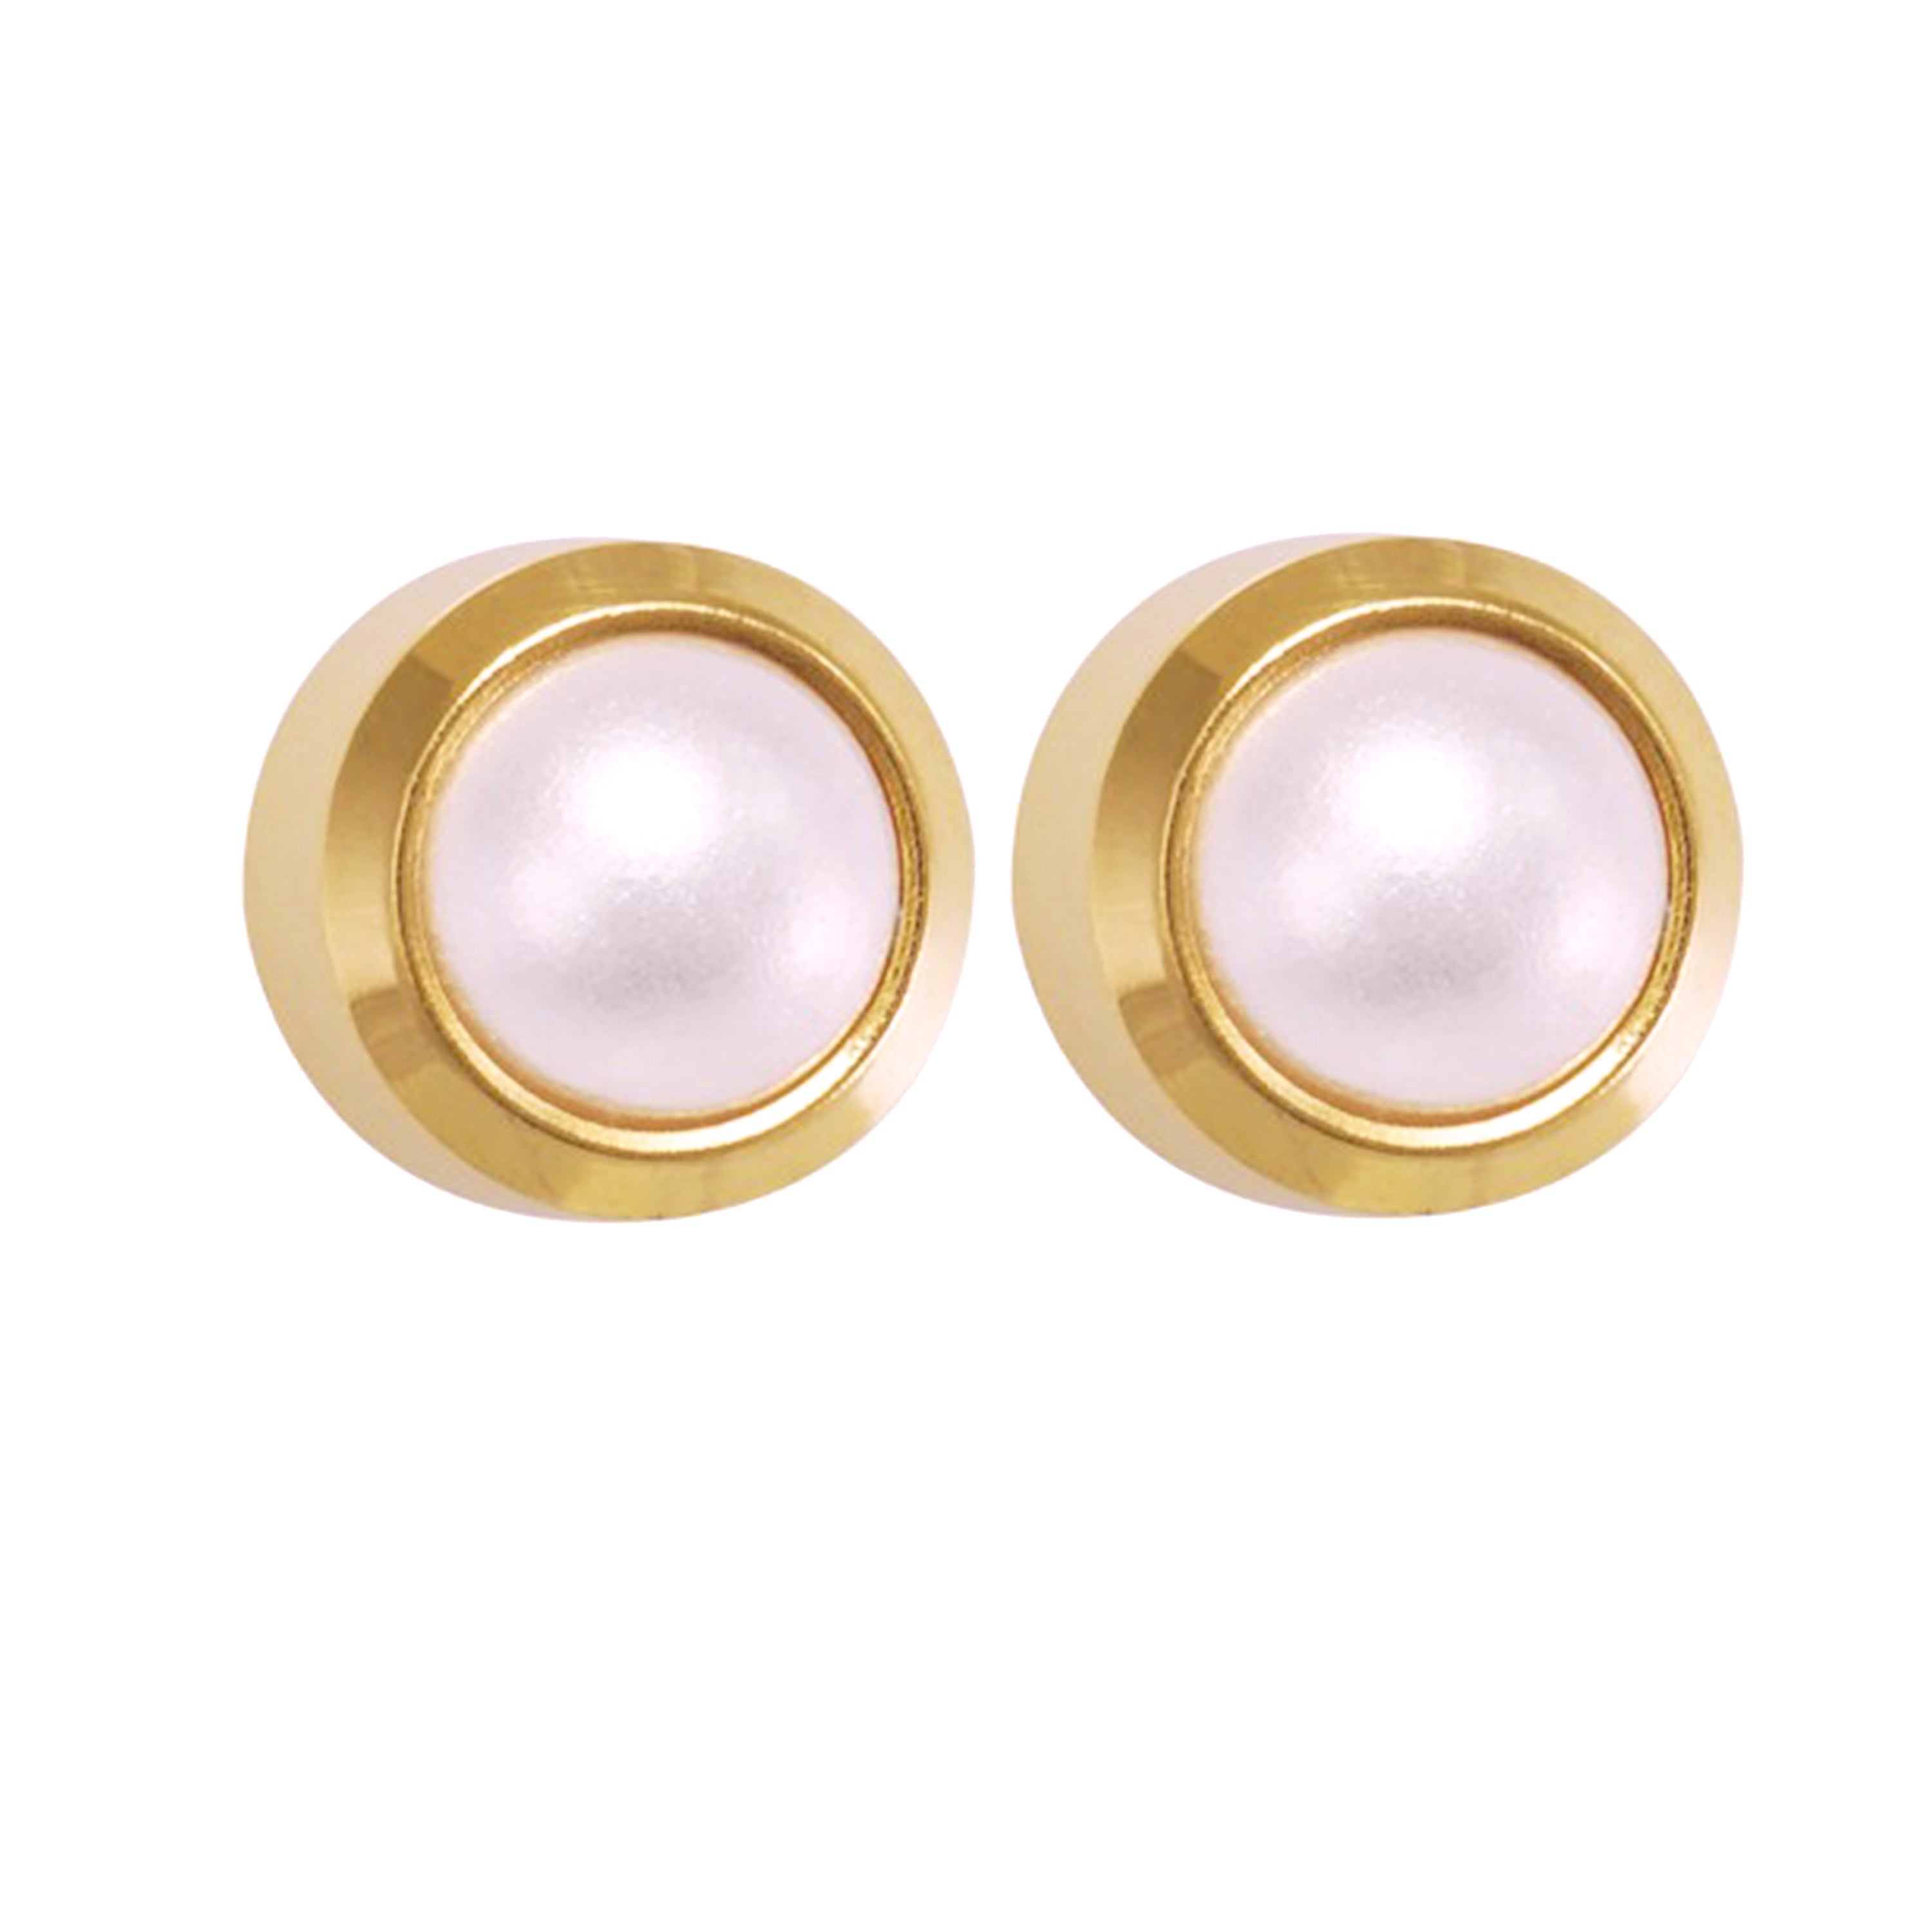 3MM White Pearl Bezel 24K Pure Gold Plated Ear Studs | MADE IN USA | Ideal for everyday wear